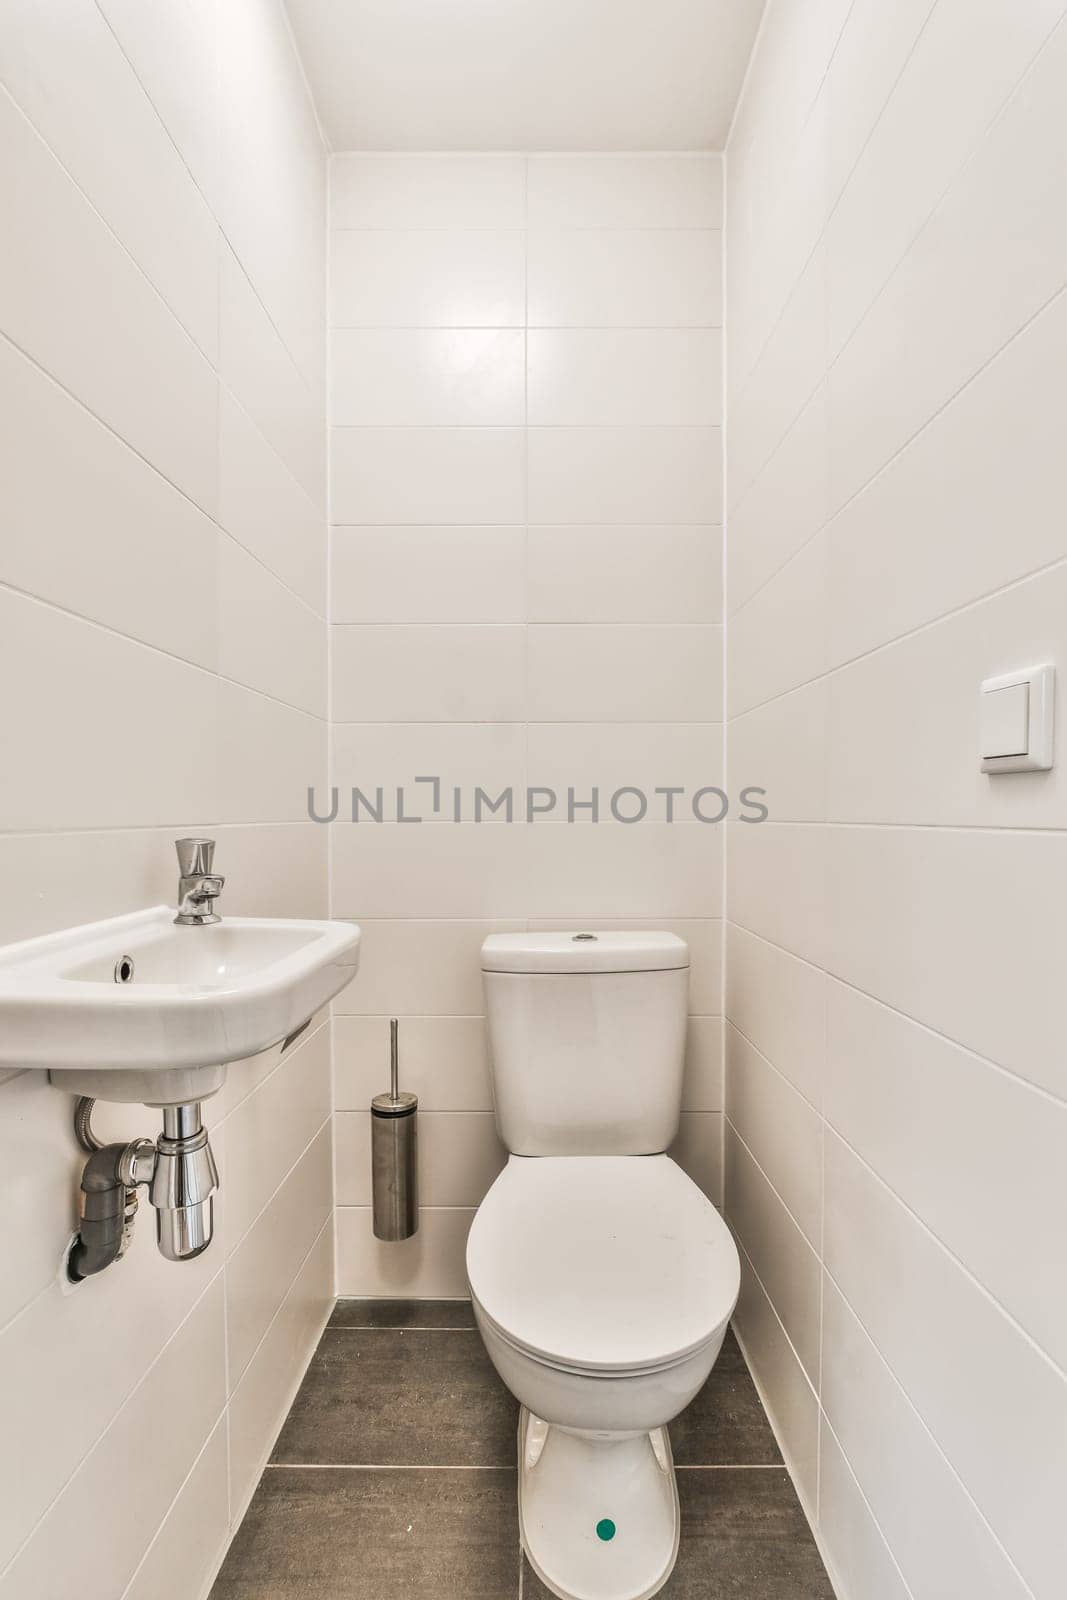 a bathroom with white tiles on the wall and toilet in the corner, there is a sink next to the toilet